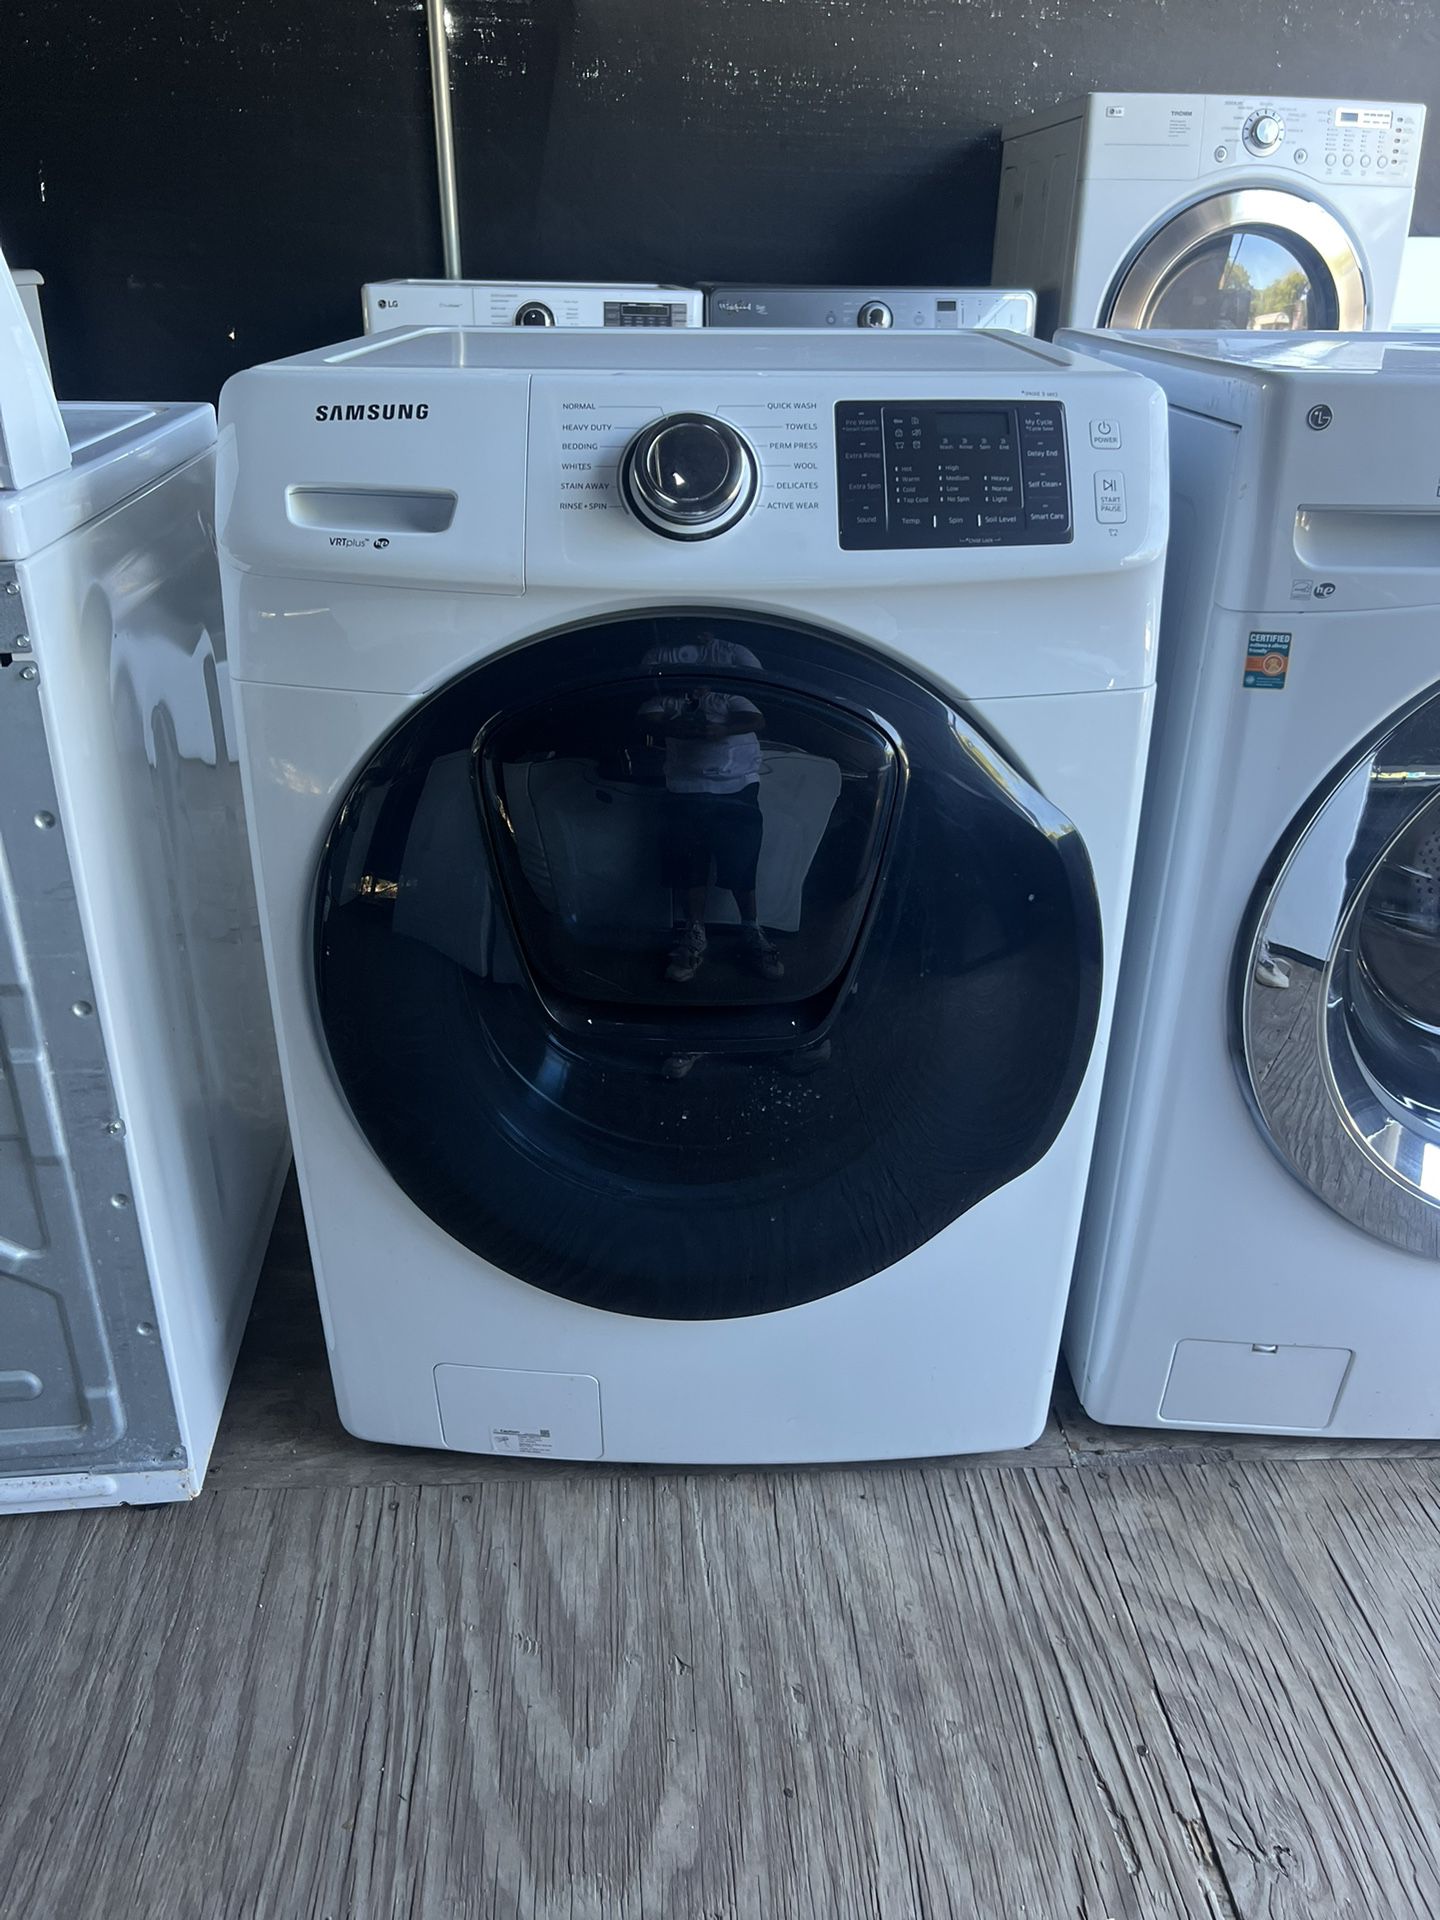 Samsung Frontload Washer   60 day warranty/ Located at:📍5415 Carmack Rd Tampa Fl 33610📍 